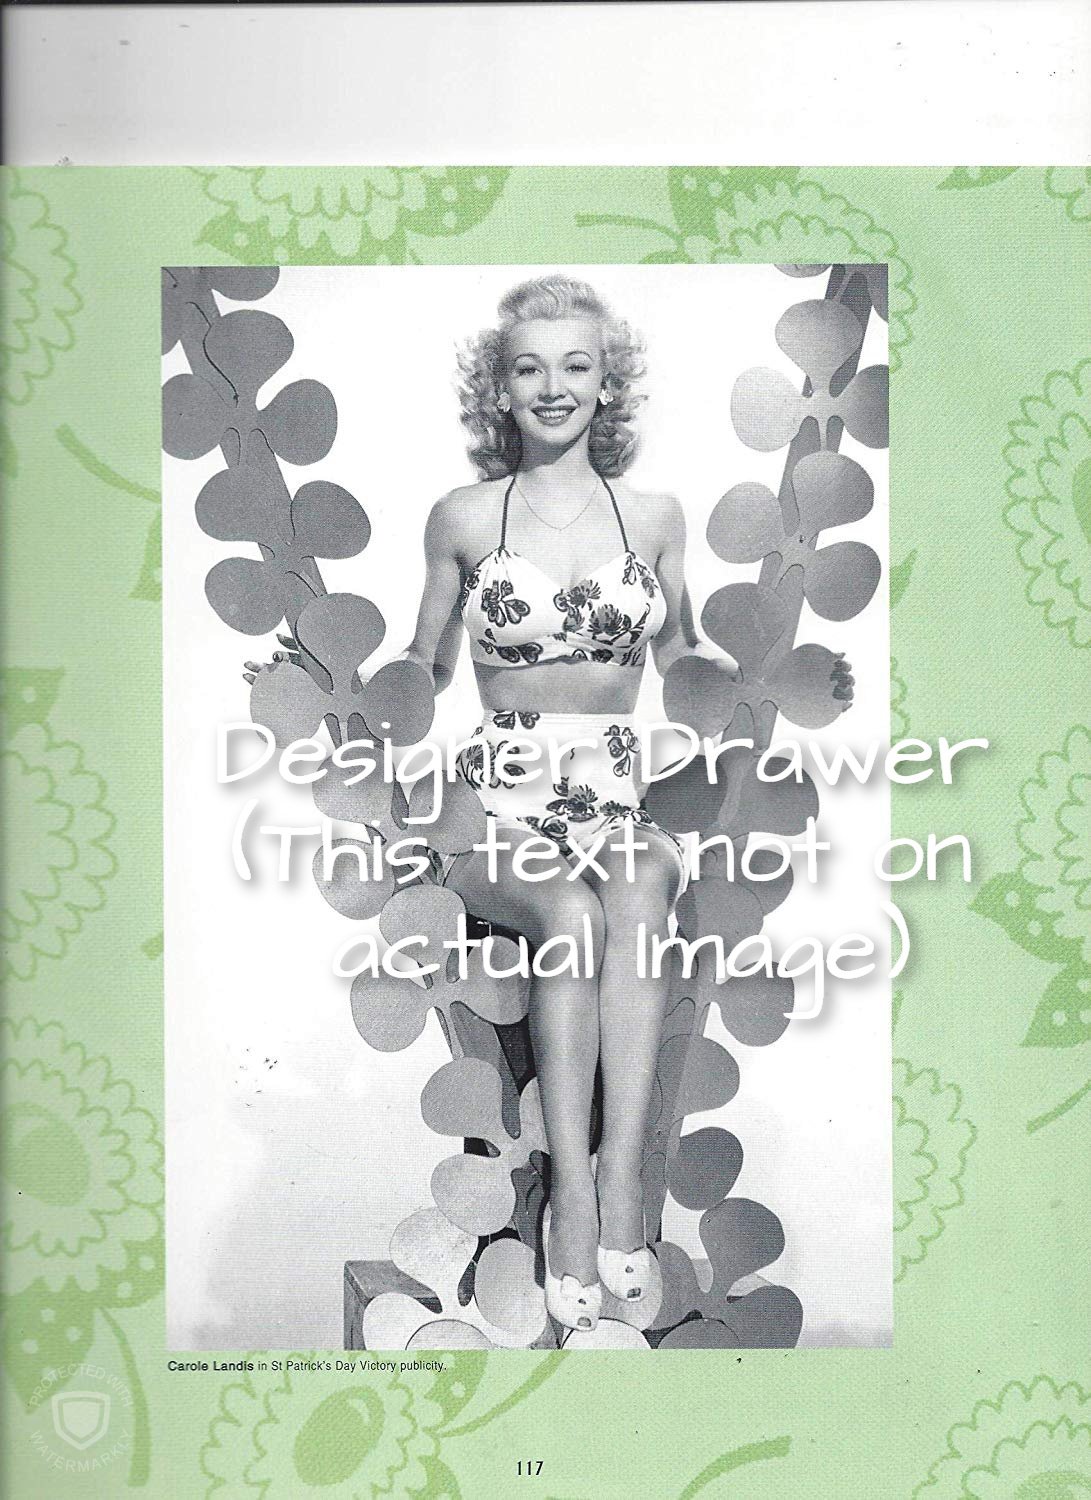 Photograph With Actress Carole Landis In Bathingsuit